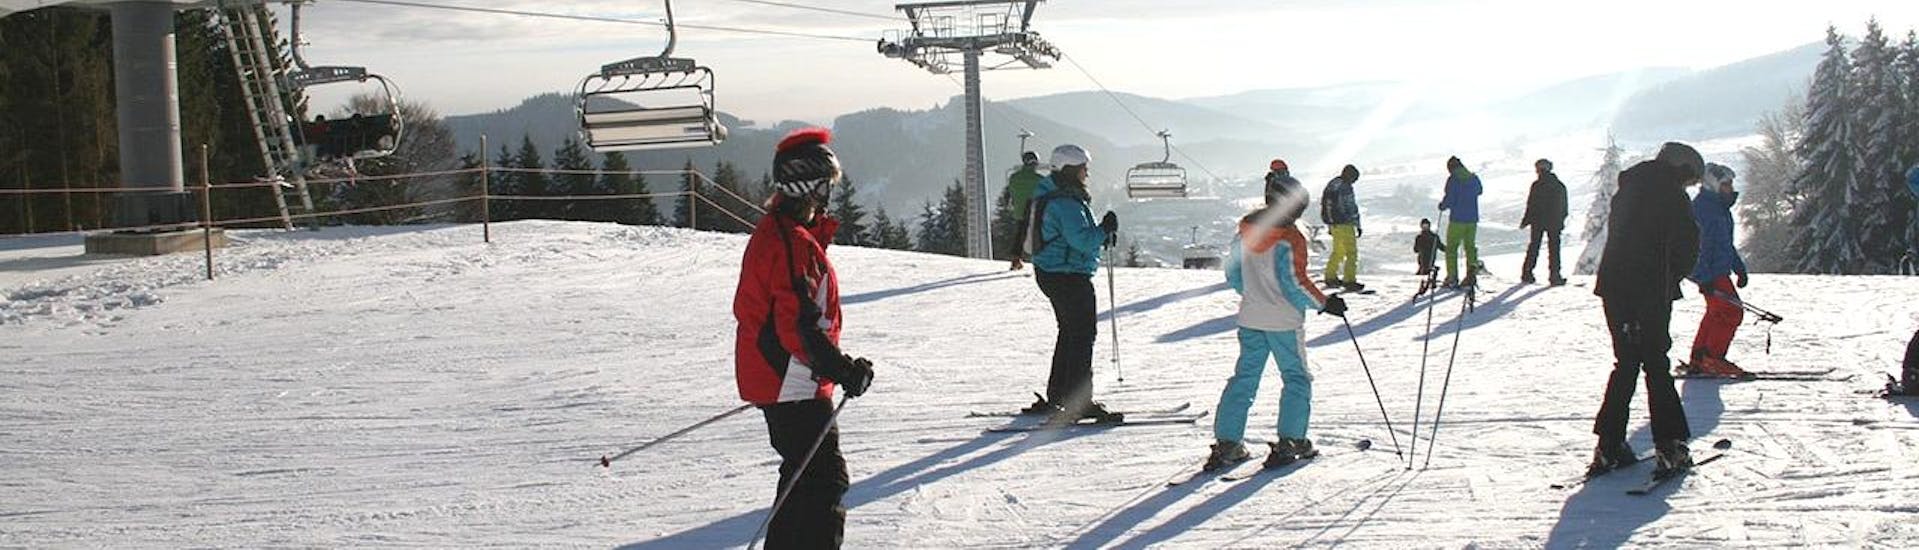 During the Snowboarding Lessons for Adults - All Levels - Half Day organised by the ski school Skischule Snow & Bike Factory Willingen, a group of snowboarders is making fast progress while riding down a slope with skiers.